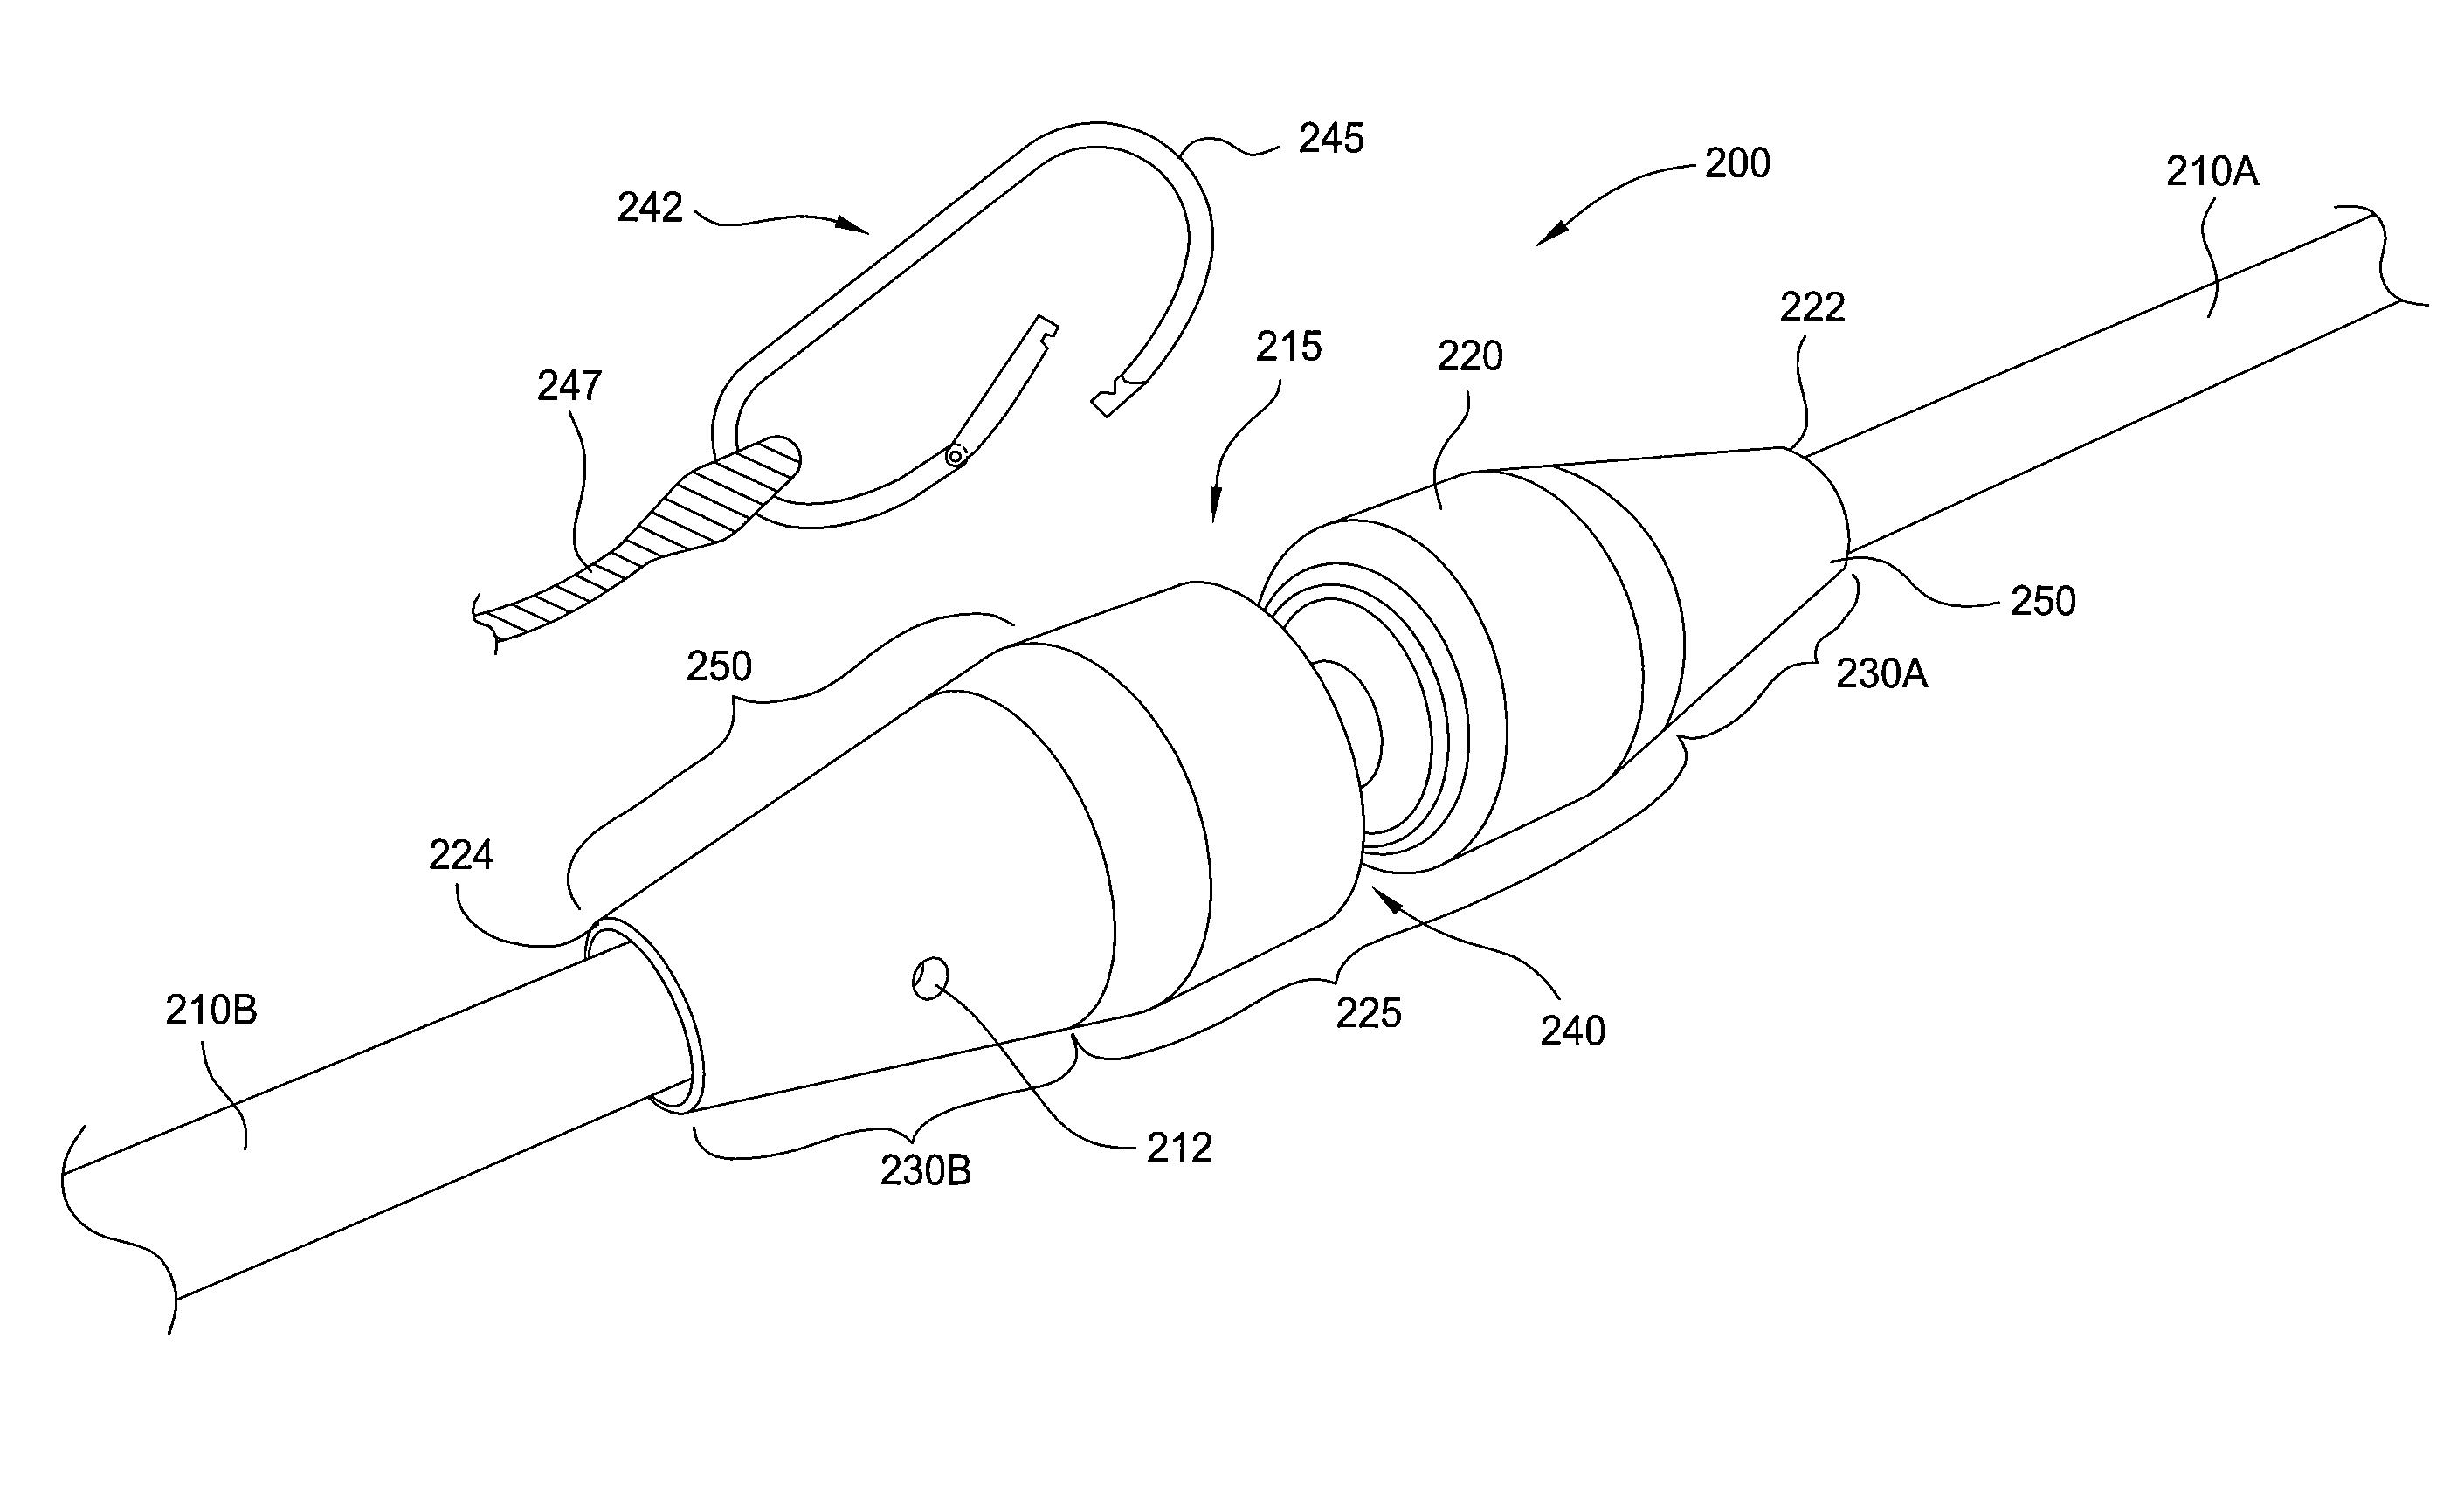 Connector for seismic cable